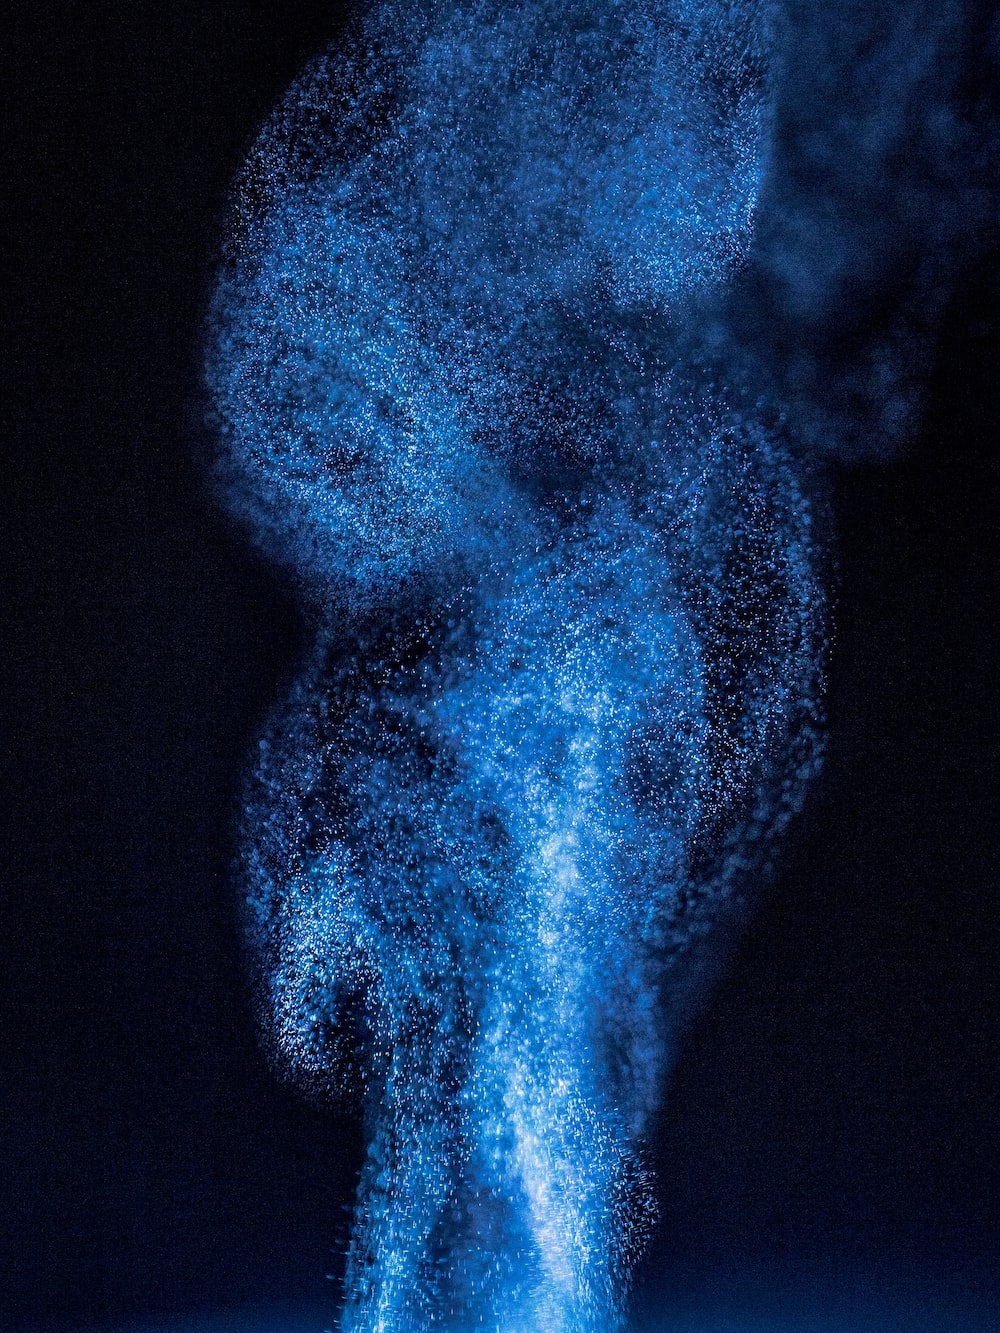 A blue smoke is coming out of the top - Dark blue, navy blue